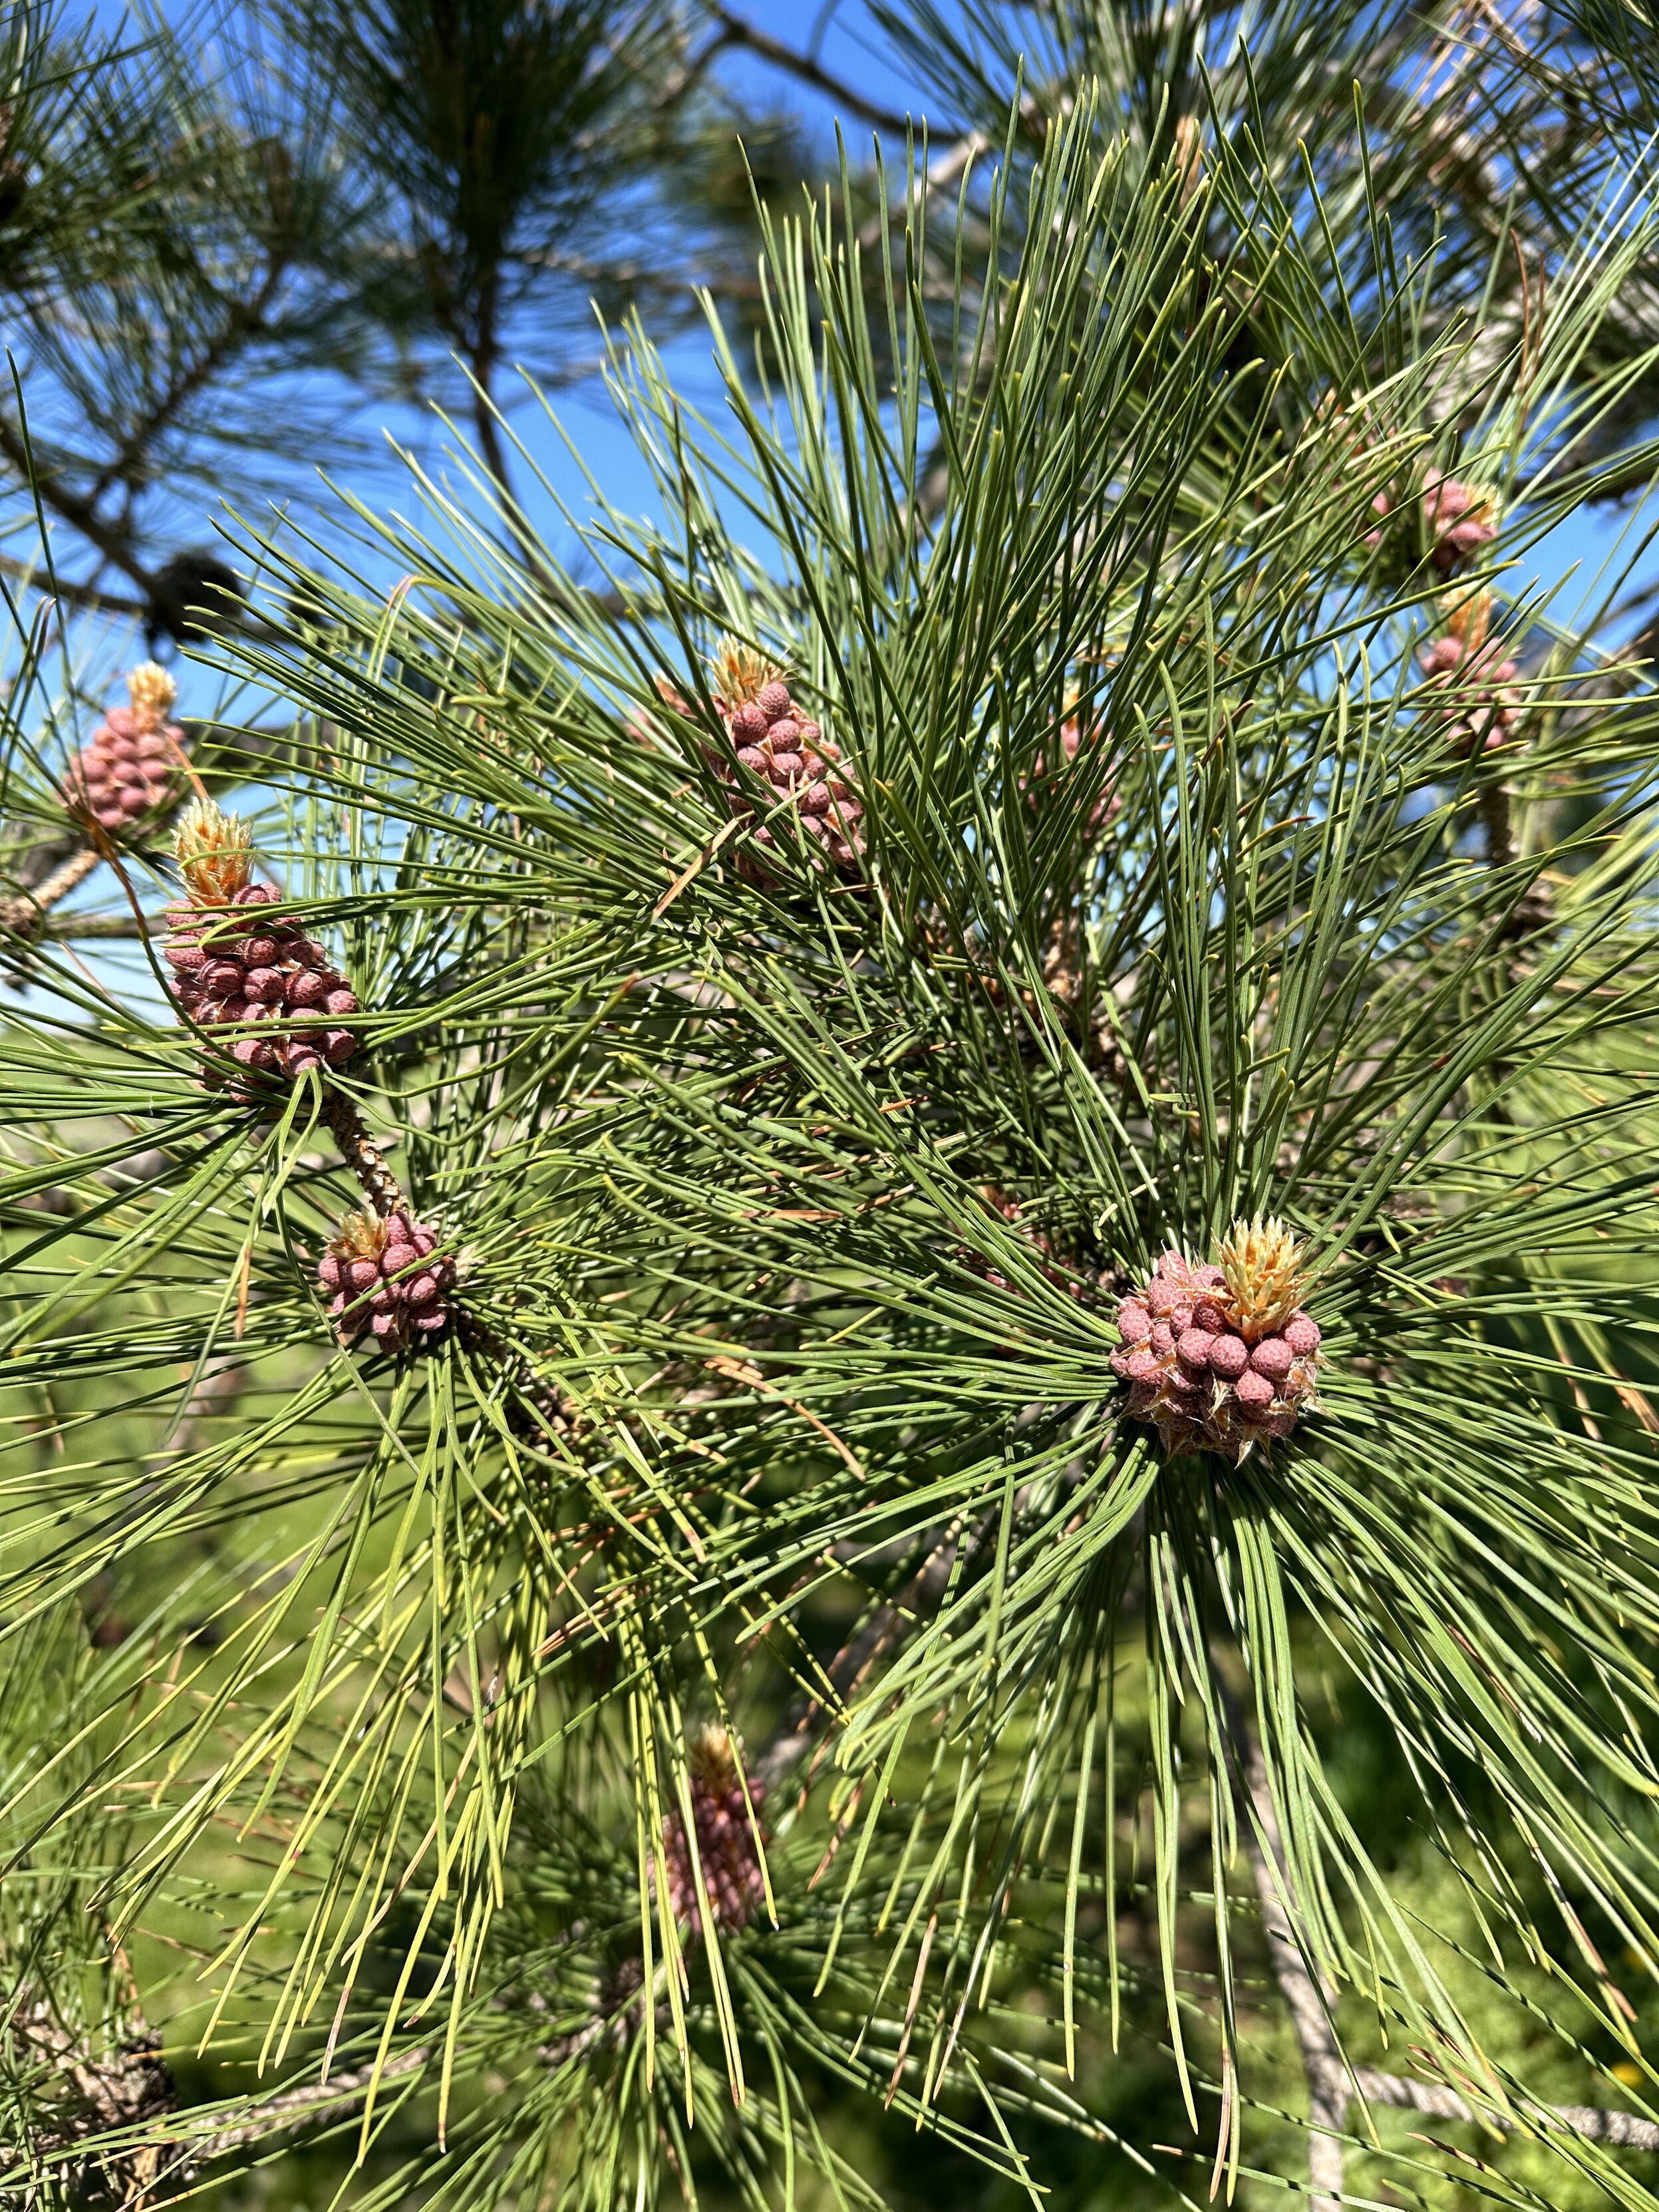 Pine tree close-up with a bunch of baby pinecones starting to form